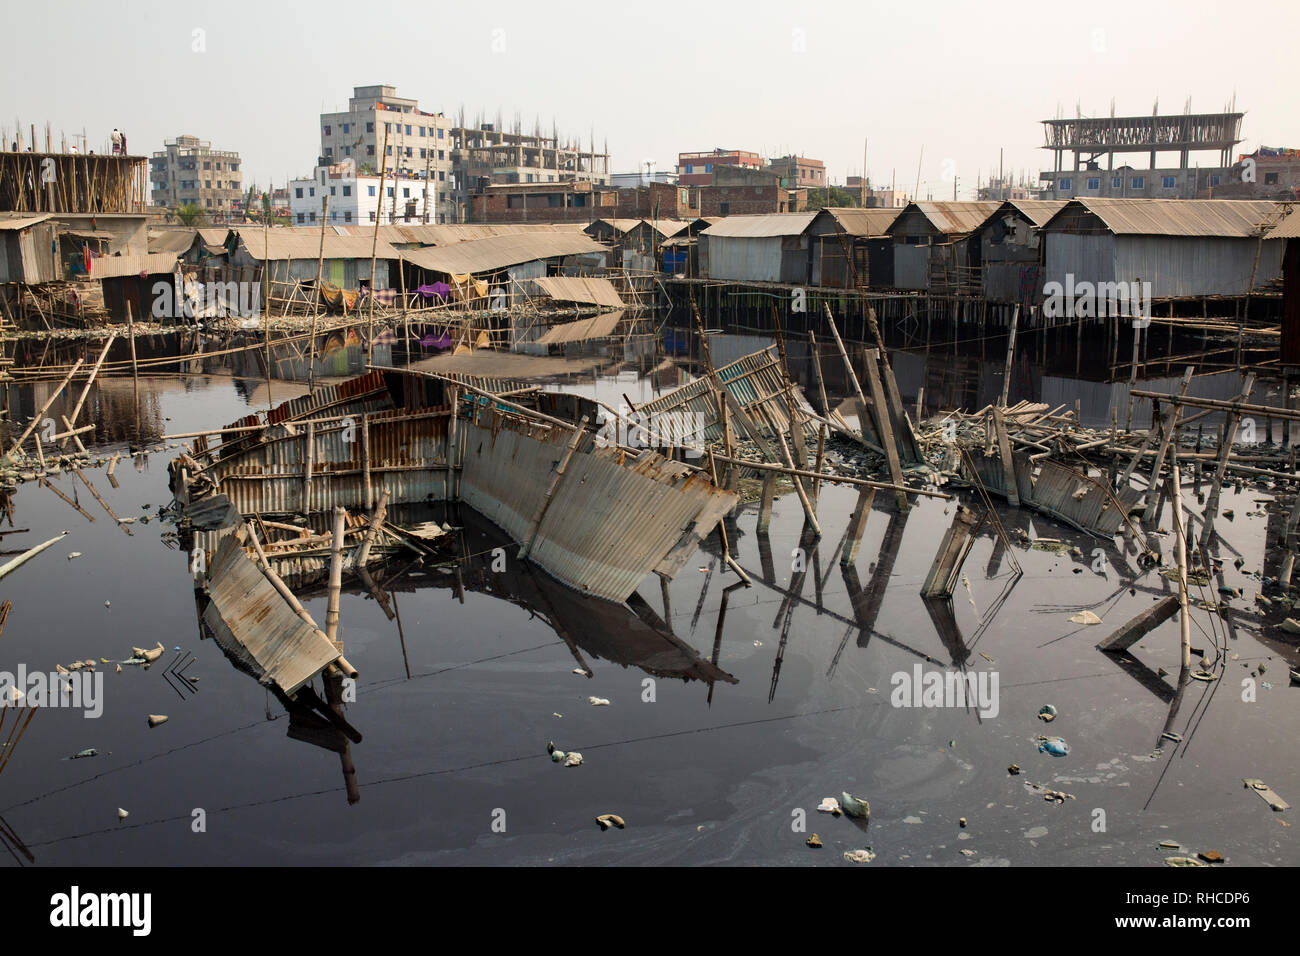 Dhaka, Bangladesh. 2nd February 2019.  : Polluted water from factories waste enter in the lake at slum area in Dhaka, Bangladesh on February 02, 2019.  In recent report says, Slum dwellers at risk of diabetes and high blood pressure in Bangladesh. Credit: zakir hossain chowdhury zakir/Alamy Live News Stock Photo